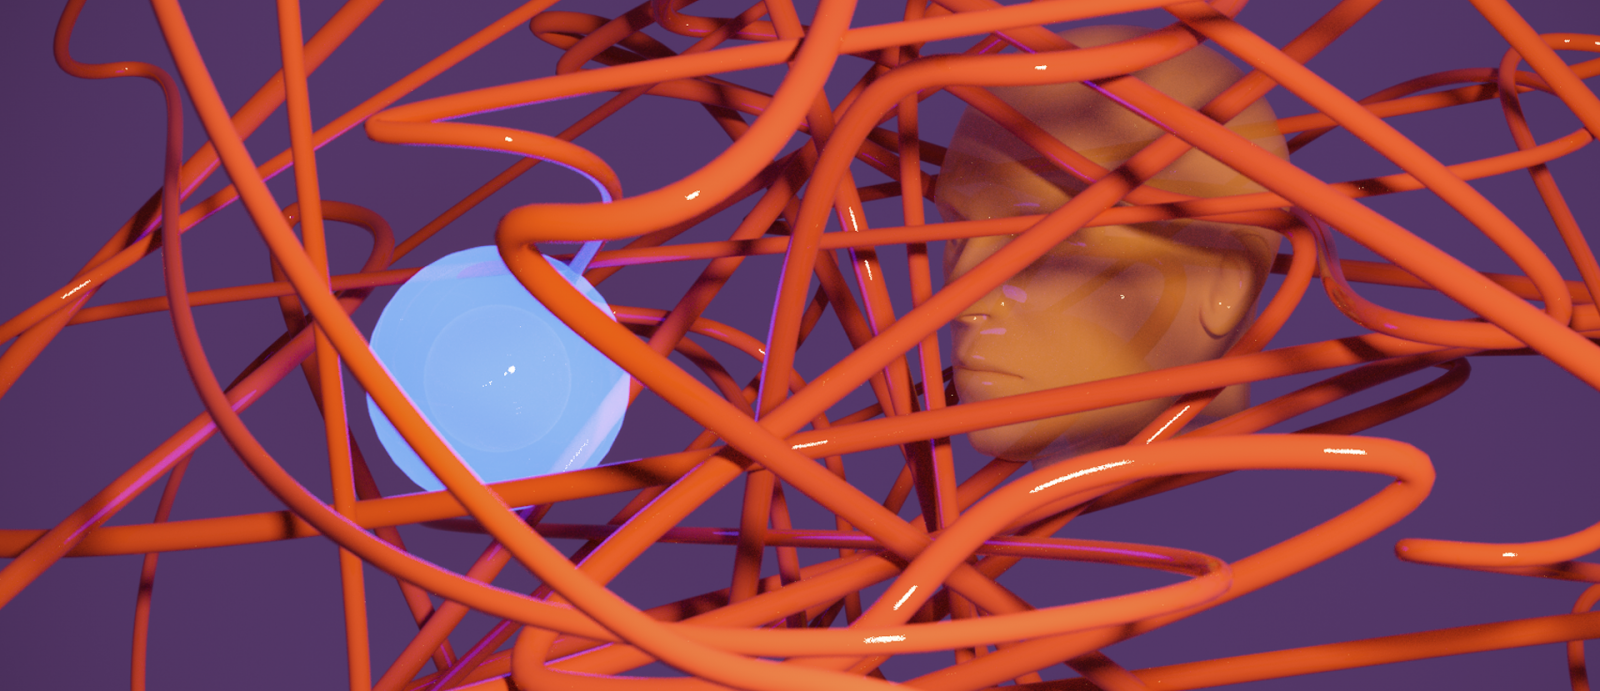 An 3D illustration with a blue orb and a model of a human head "staring" at eachother. Crisscrosing and surrounding them is a messy orange line, conveying confusion and frustration.